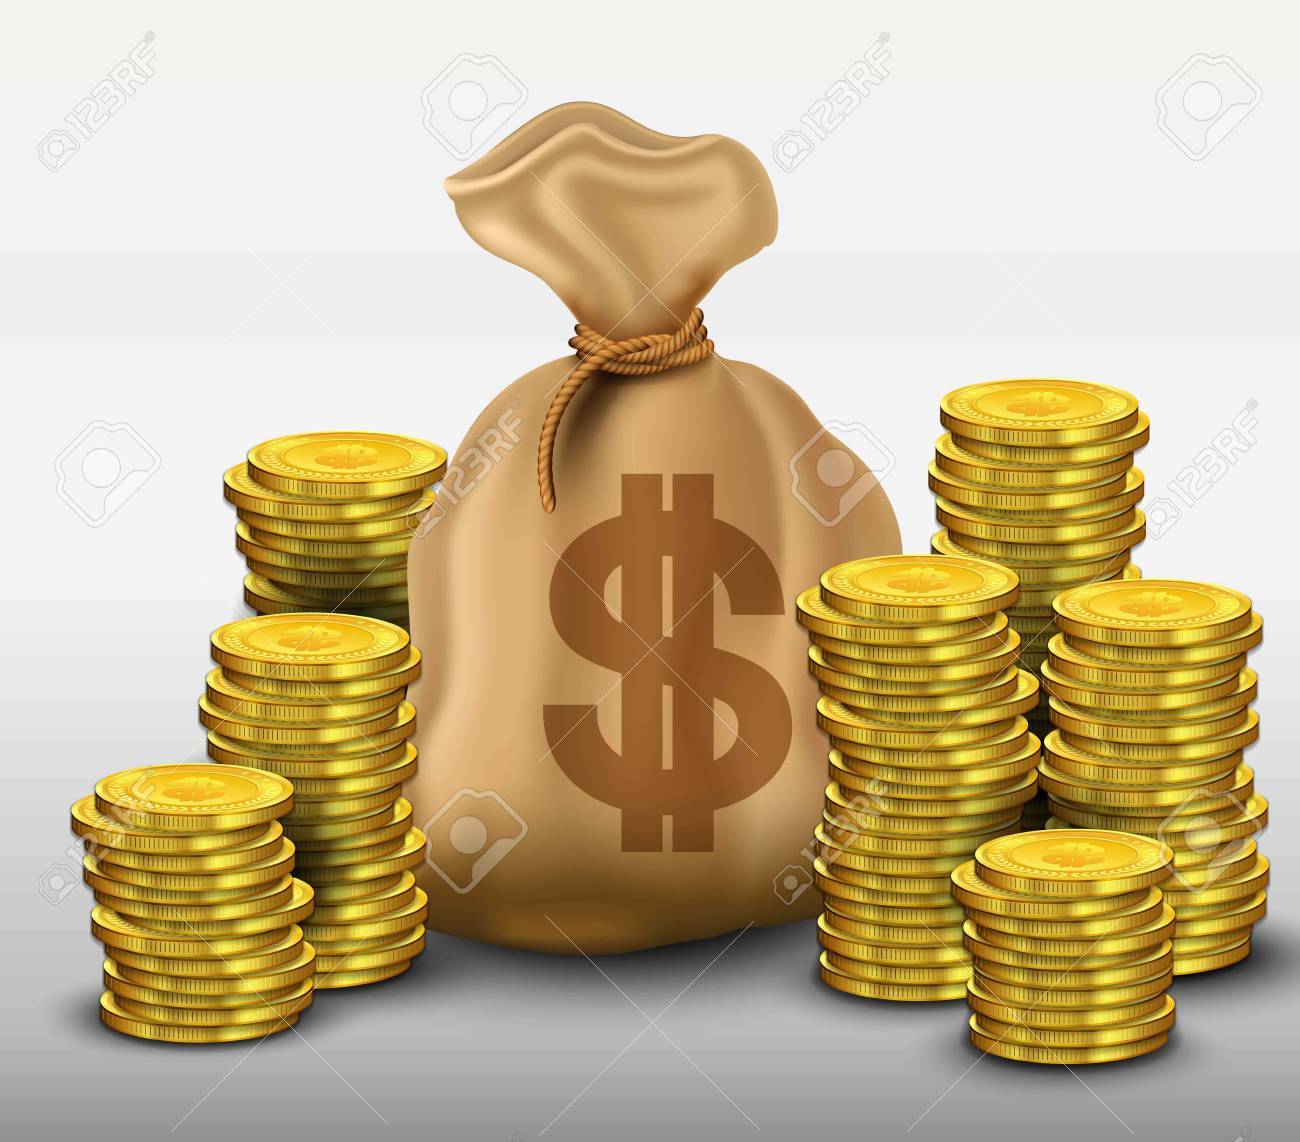 67129004-money-bag-with-gold-coins-dollars.jpg